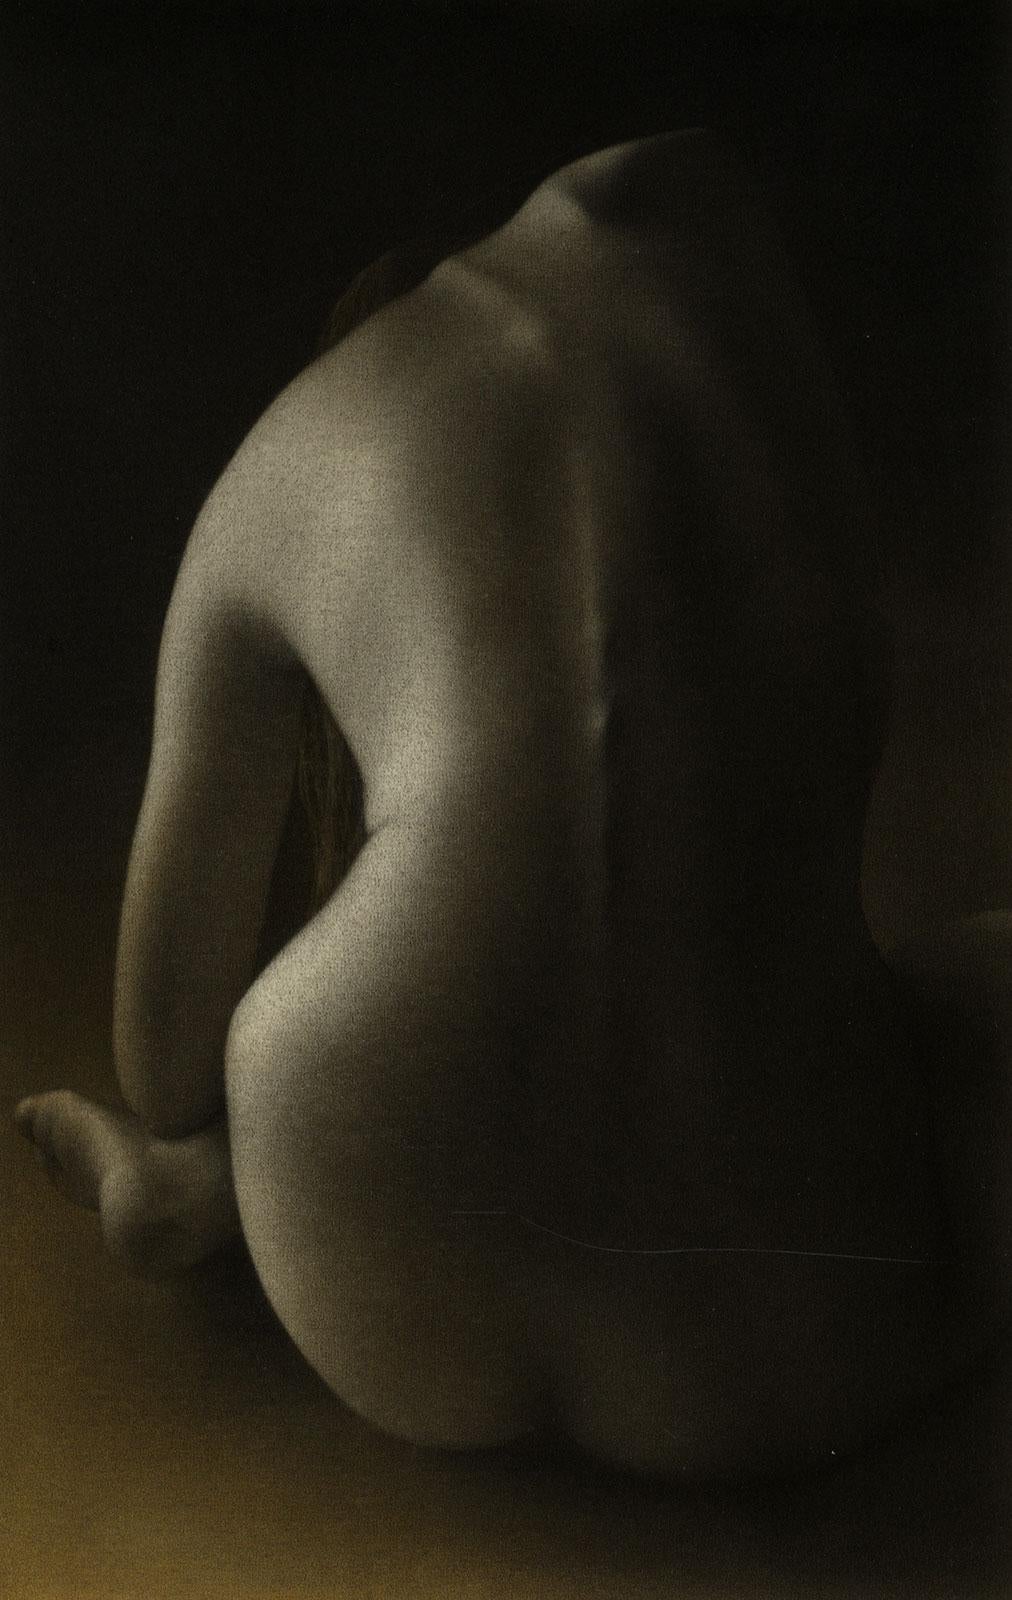 Mikio Watanabe Nude Print - Dos III (A young nude woman seen from the back)